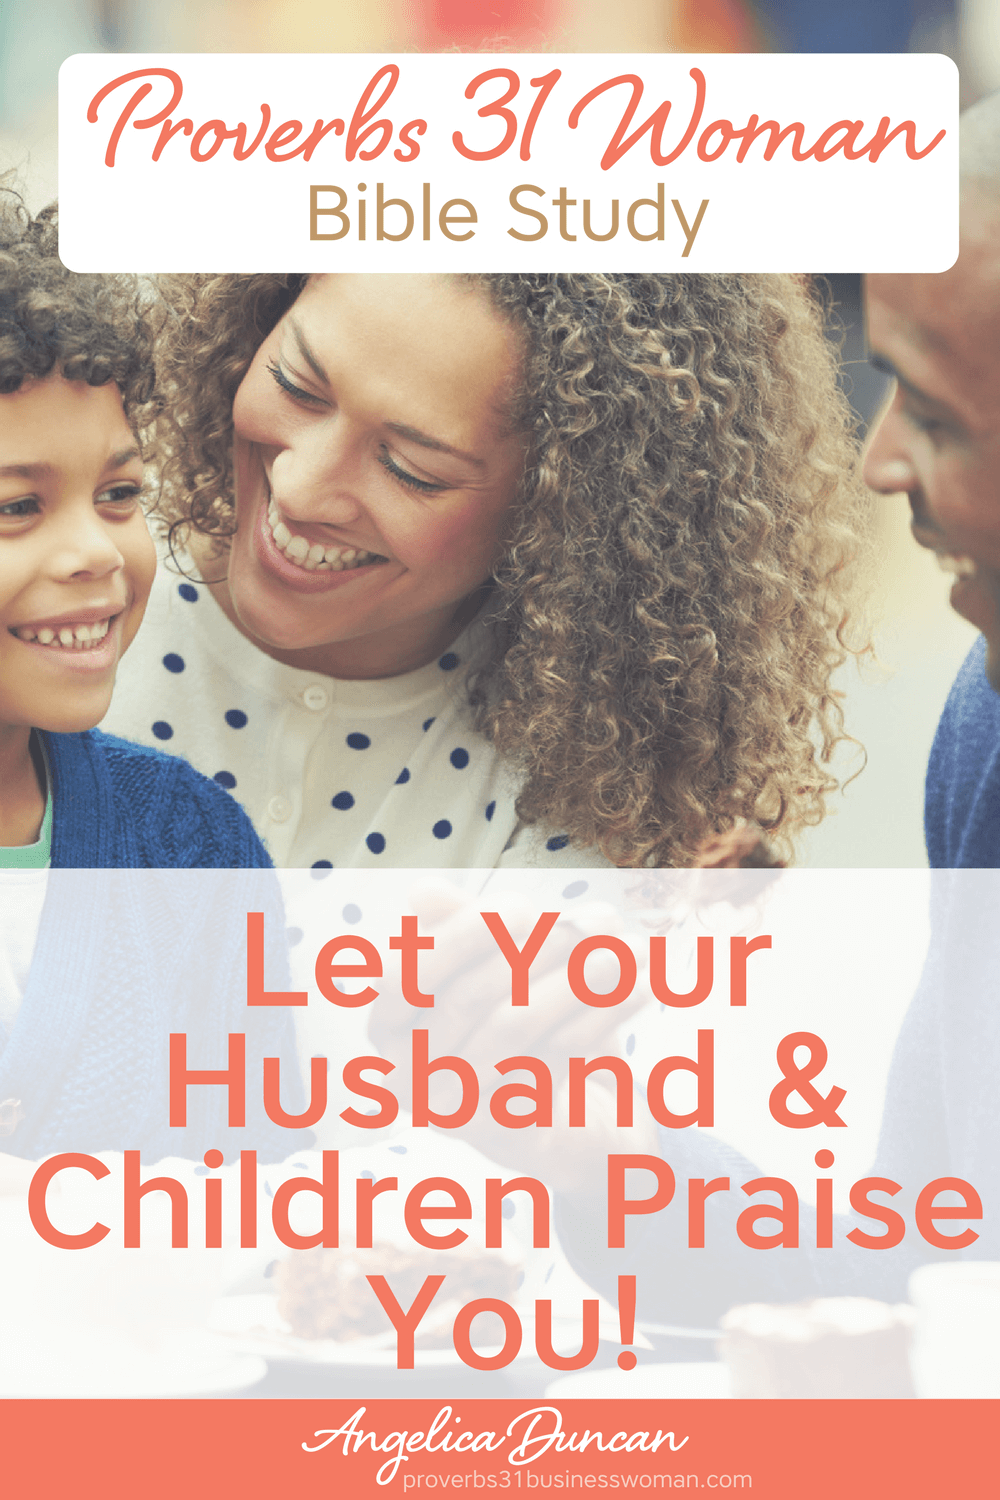 What's the Living Legacy you want to have for yourself? Join our Proverbs 31 Bible Study to become a woman whose family praises her works & character! #p31 #proverbs31woman #proverbs31businesswoman #biblestudy #christianblogger #jesusgirl